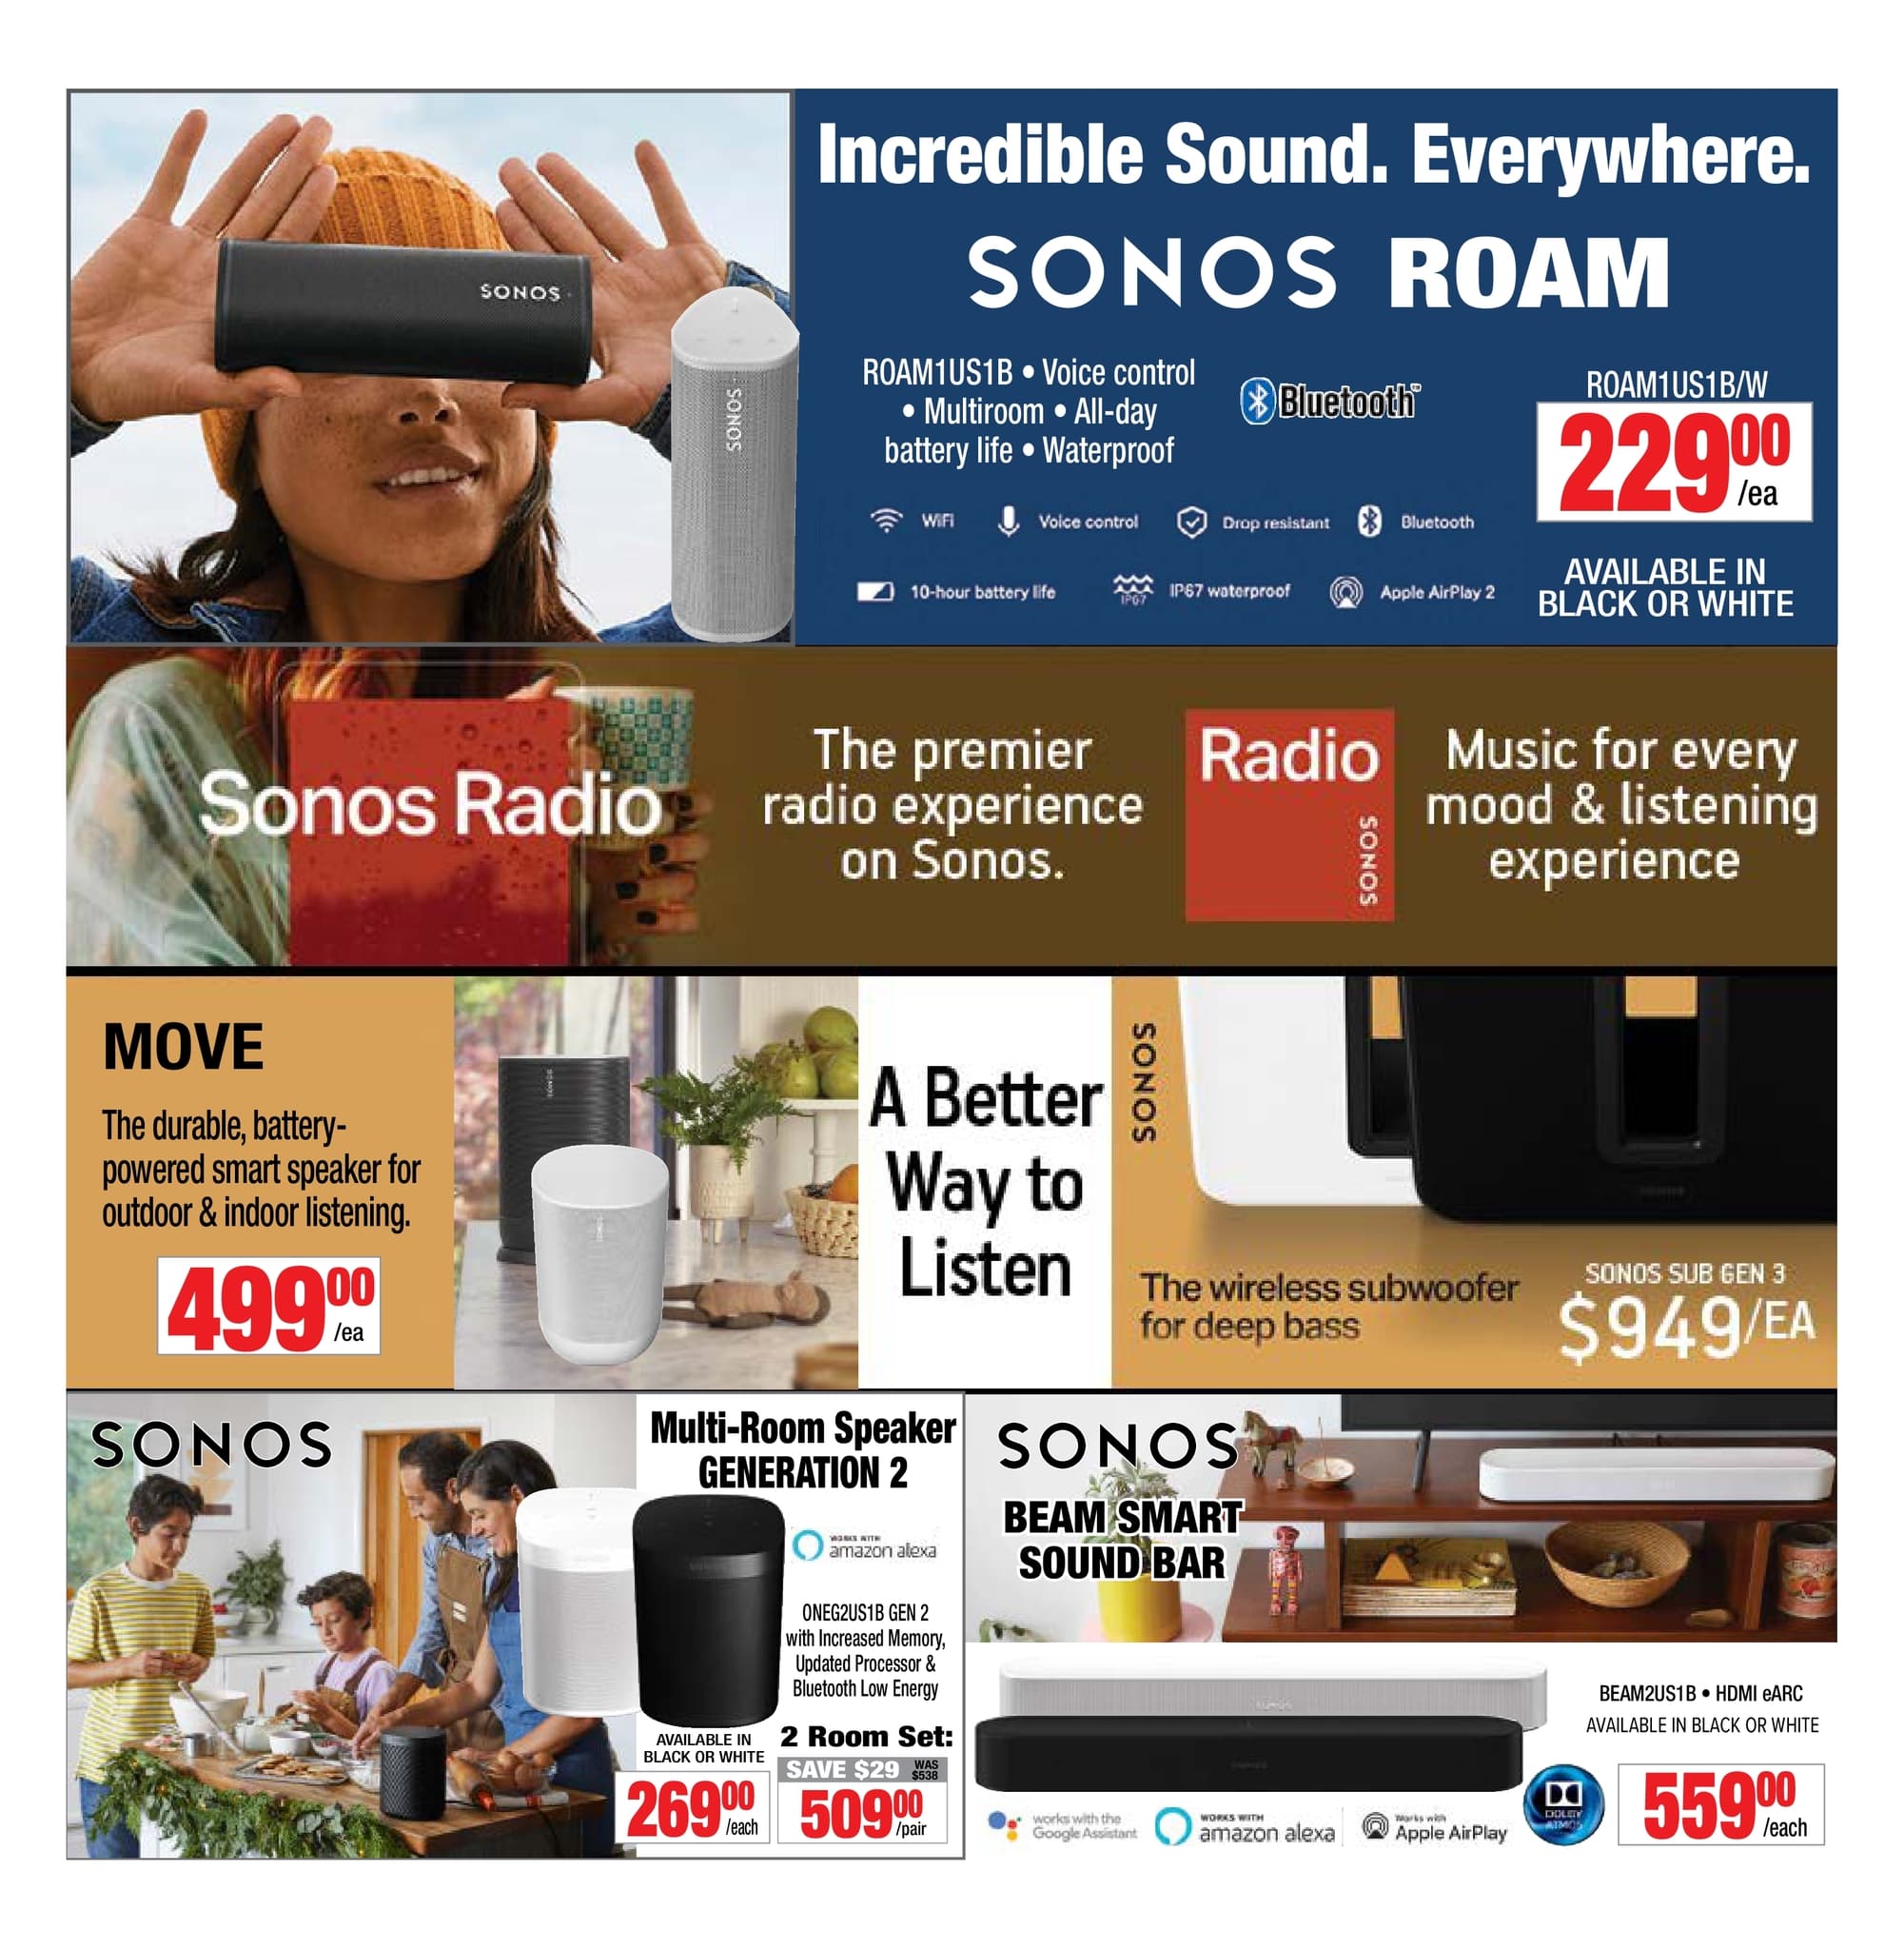 2001 Audio Video - Weekly Flyer Specials - Page 12